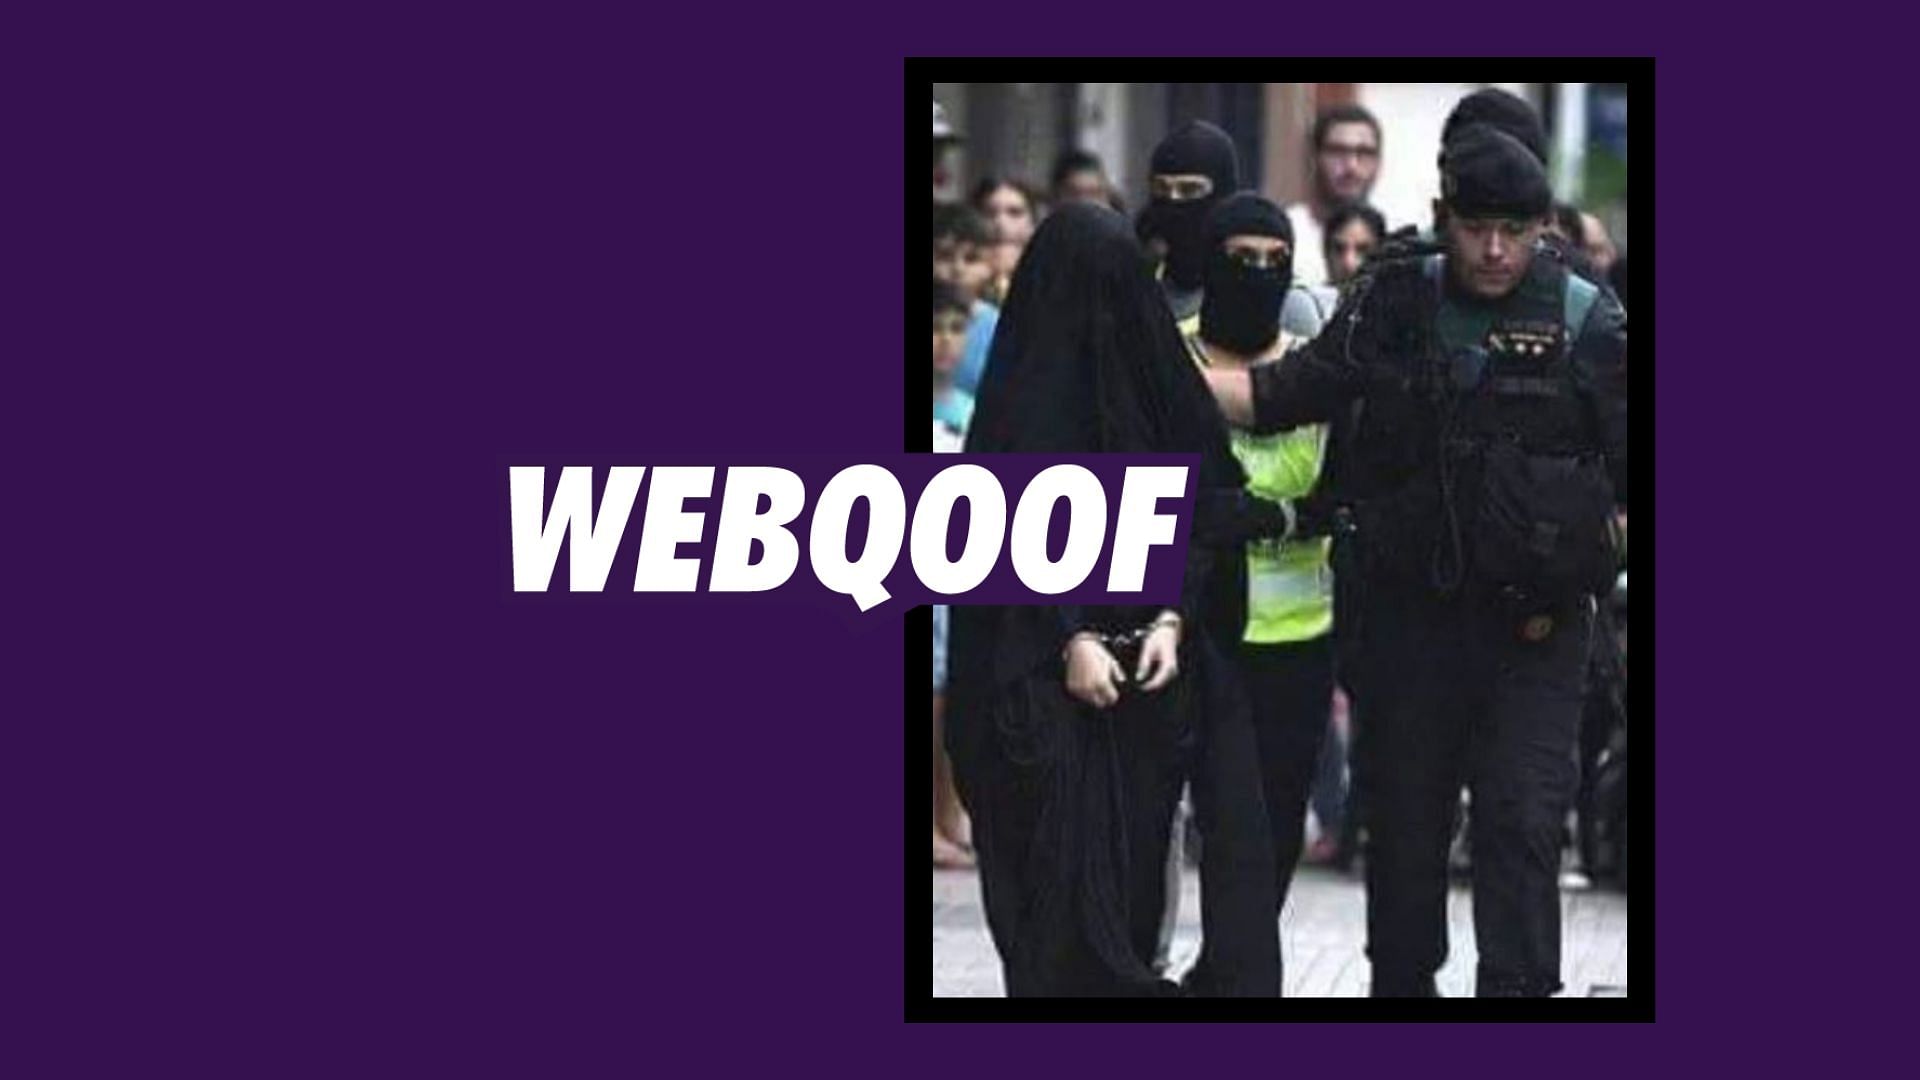 A photograph is being circulated online with the claim that a Muslim woman was arrested in Australia for wearing a burqa.